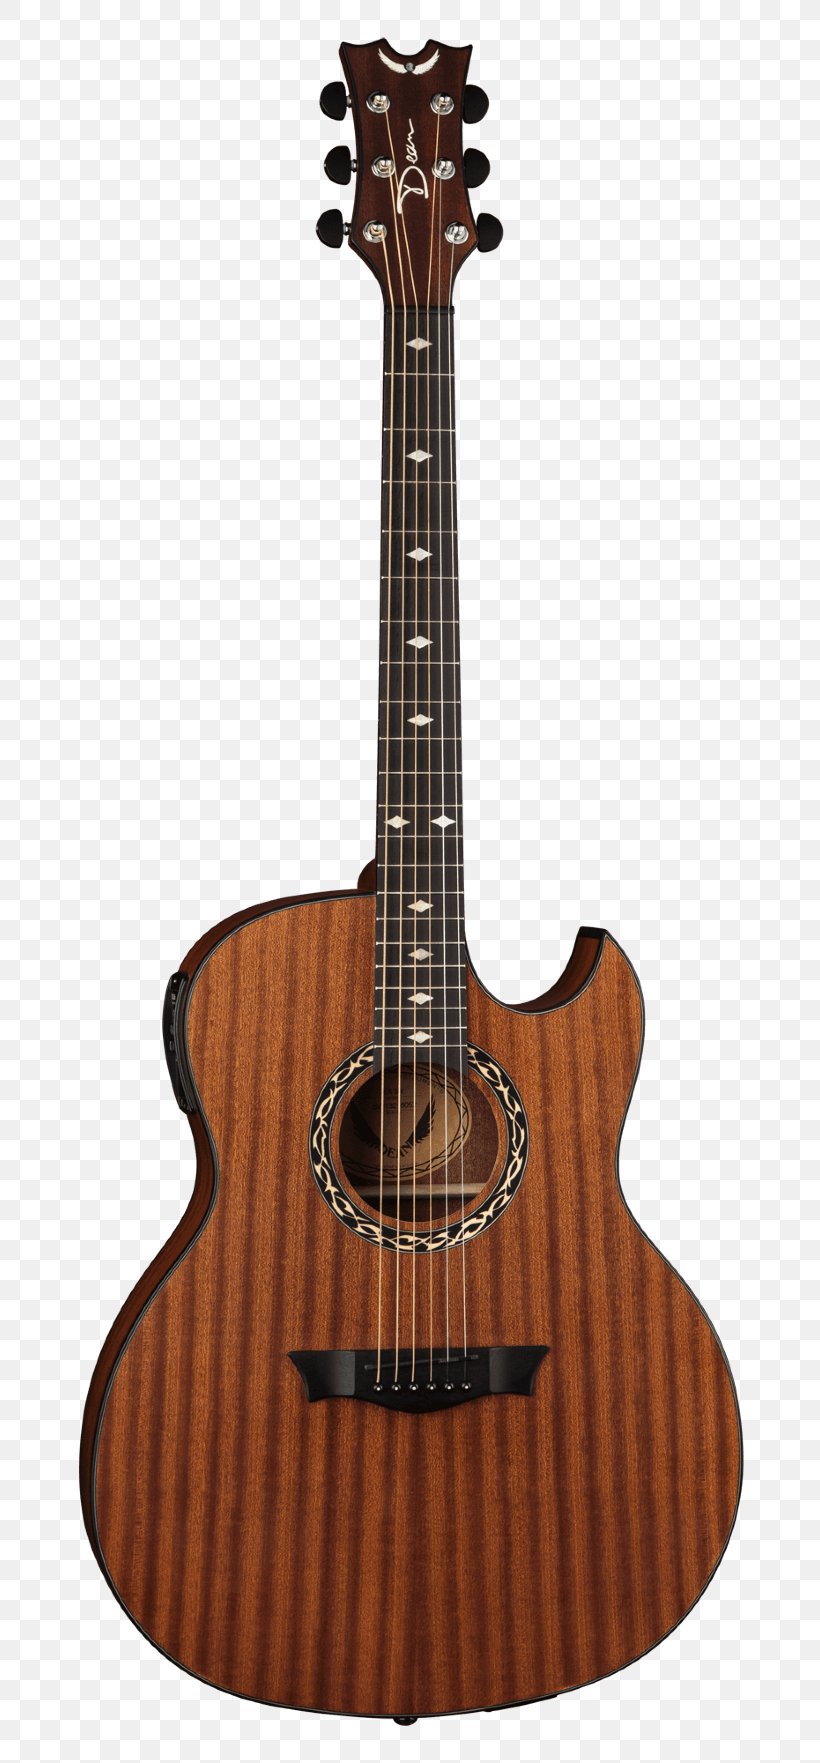 Microphone Acoustic-electric Guitar Acoustic Guitar, PNG, 750x1763px, Microphone, Acoustic Electric Guitar, Acoustic Guitar, Acousticelectric Guitar, Bass Guitar Download Free